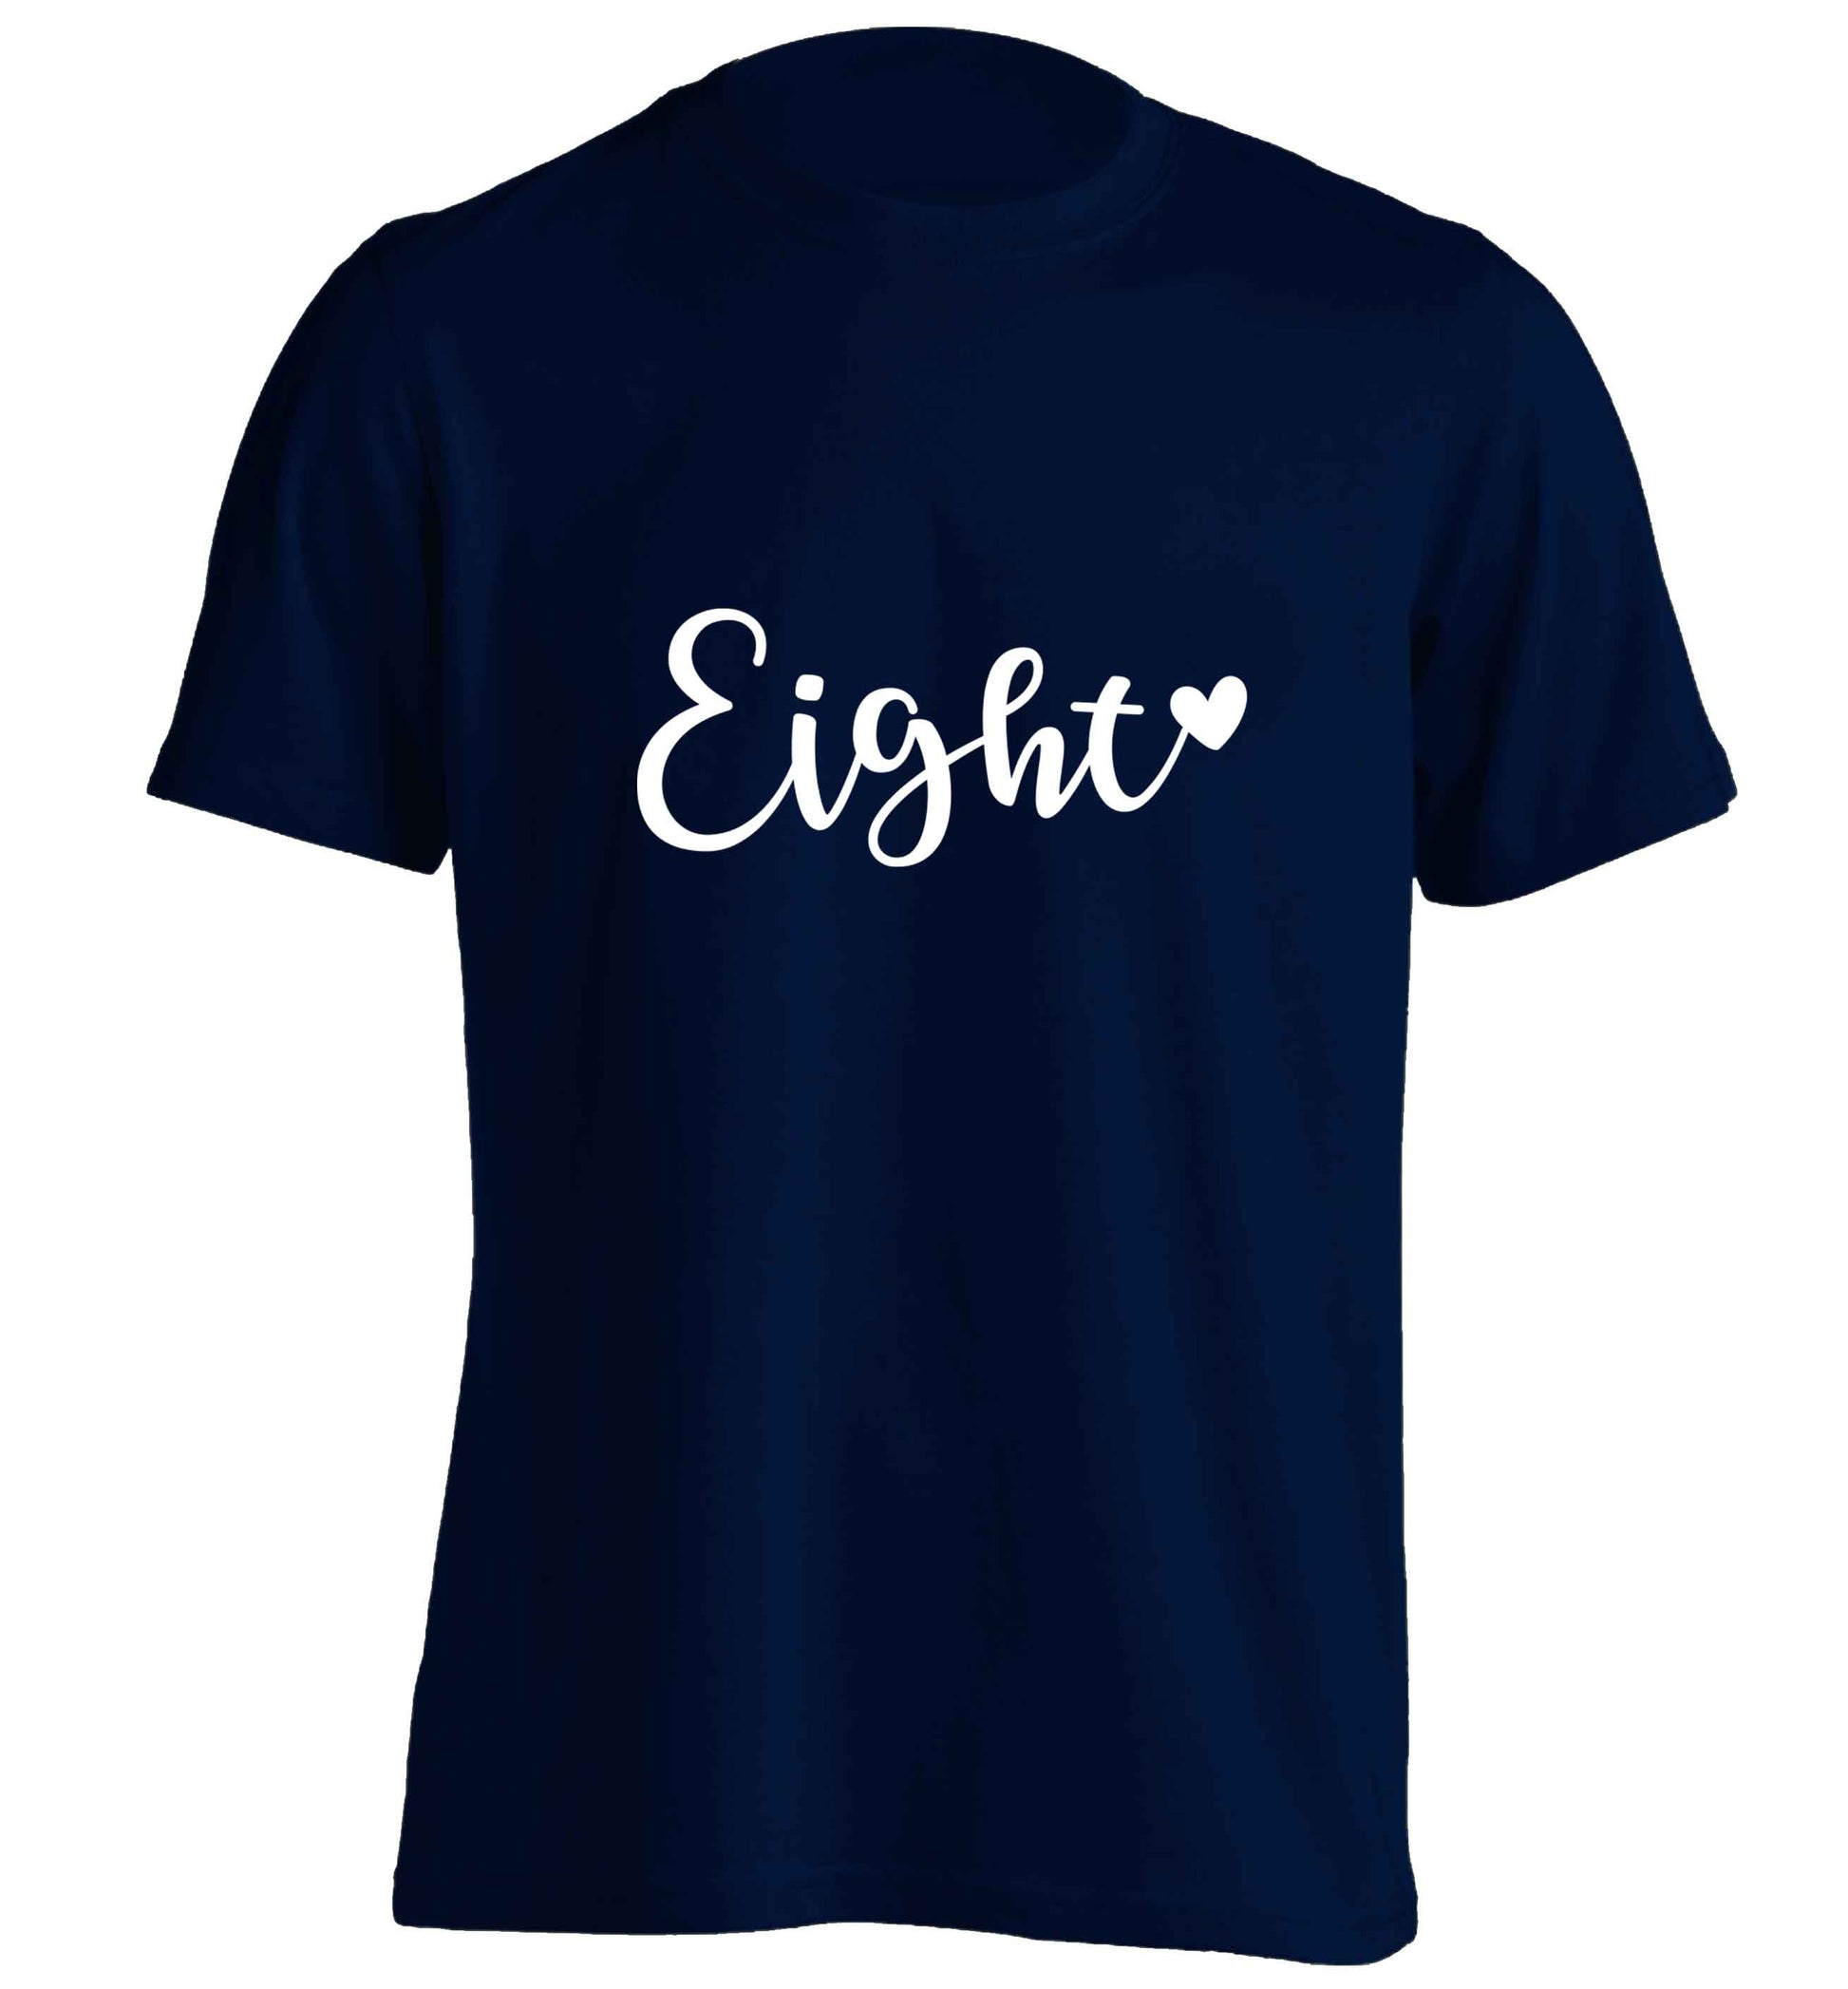 Eight and heart adults unisex navy Tshirt 2XL